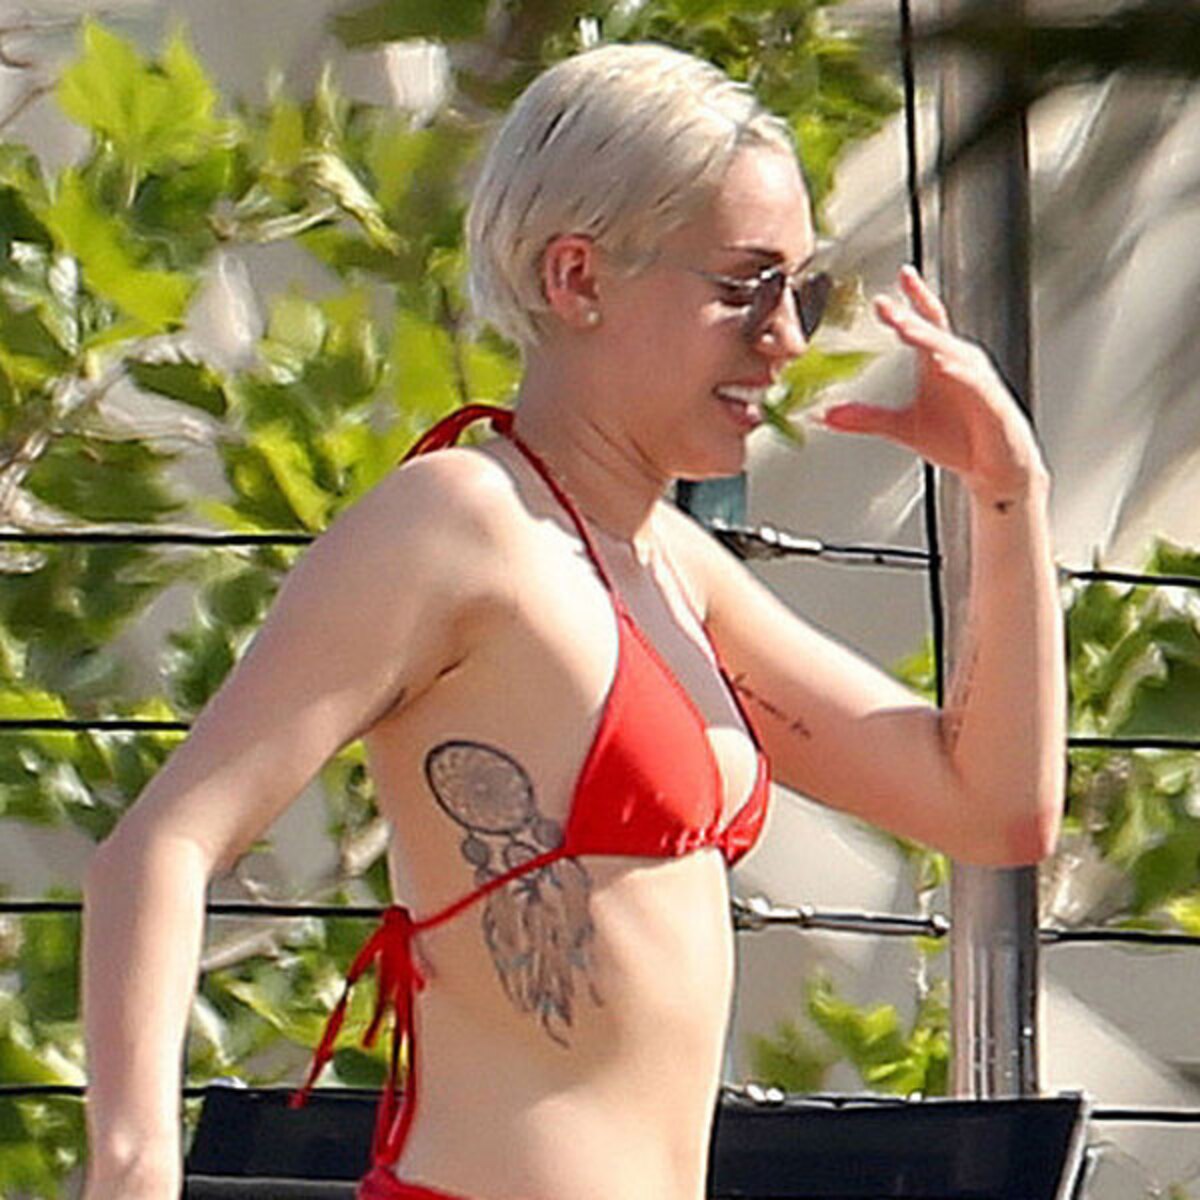 blake steinberg recommends miley cyrus bathing suit pic